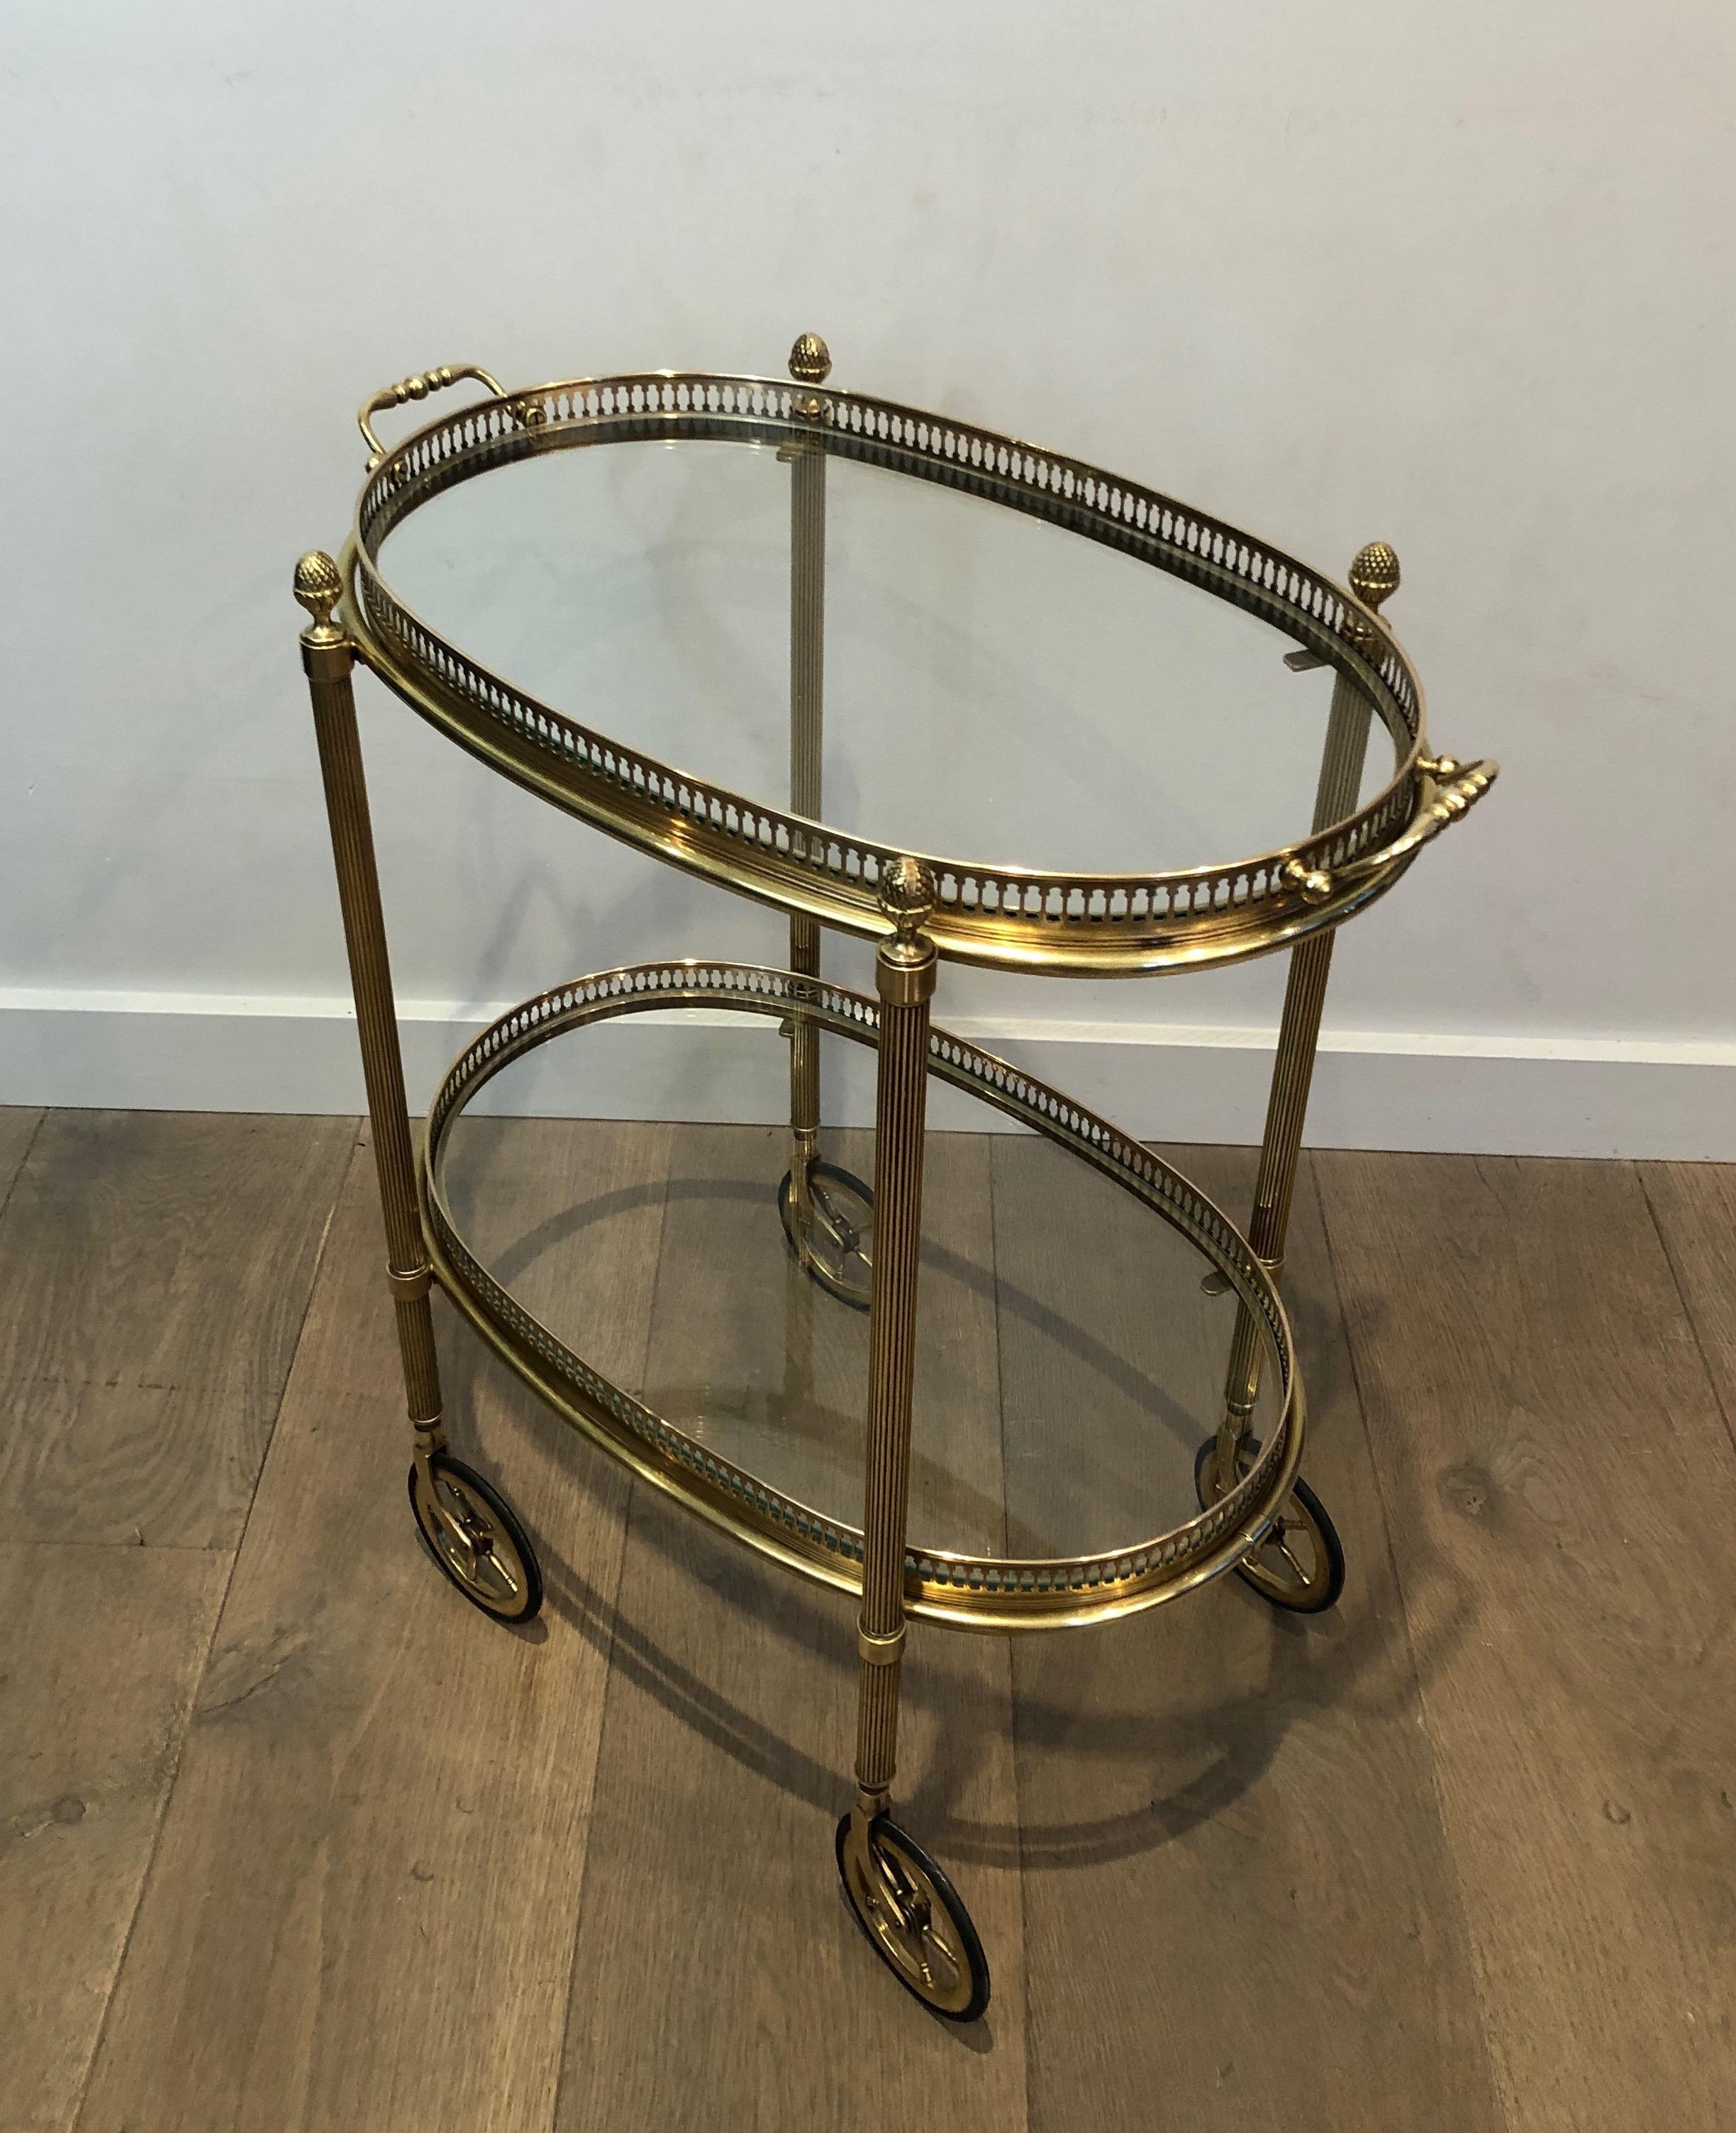 This very nice neoclassical small oval brass bar cart is made of brass with 2 removable trays. This drinks trolley was made by famous French designer Maison Baguès, circa 1940.